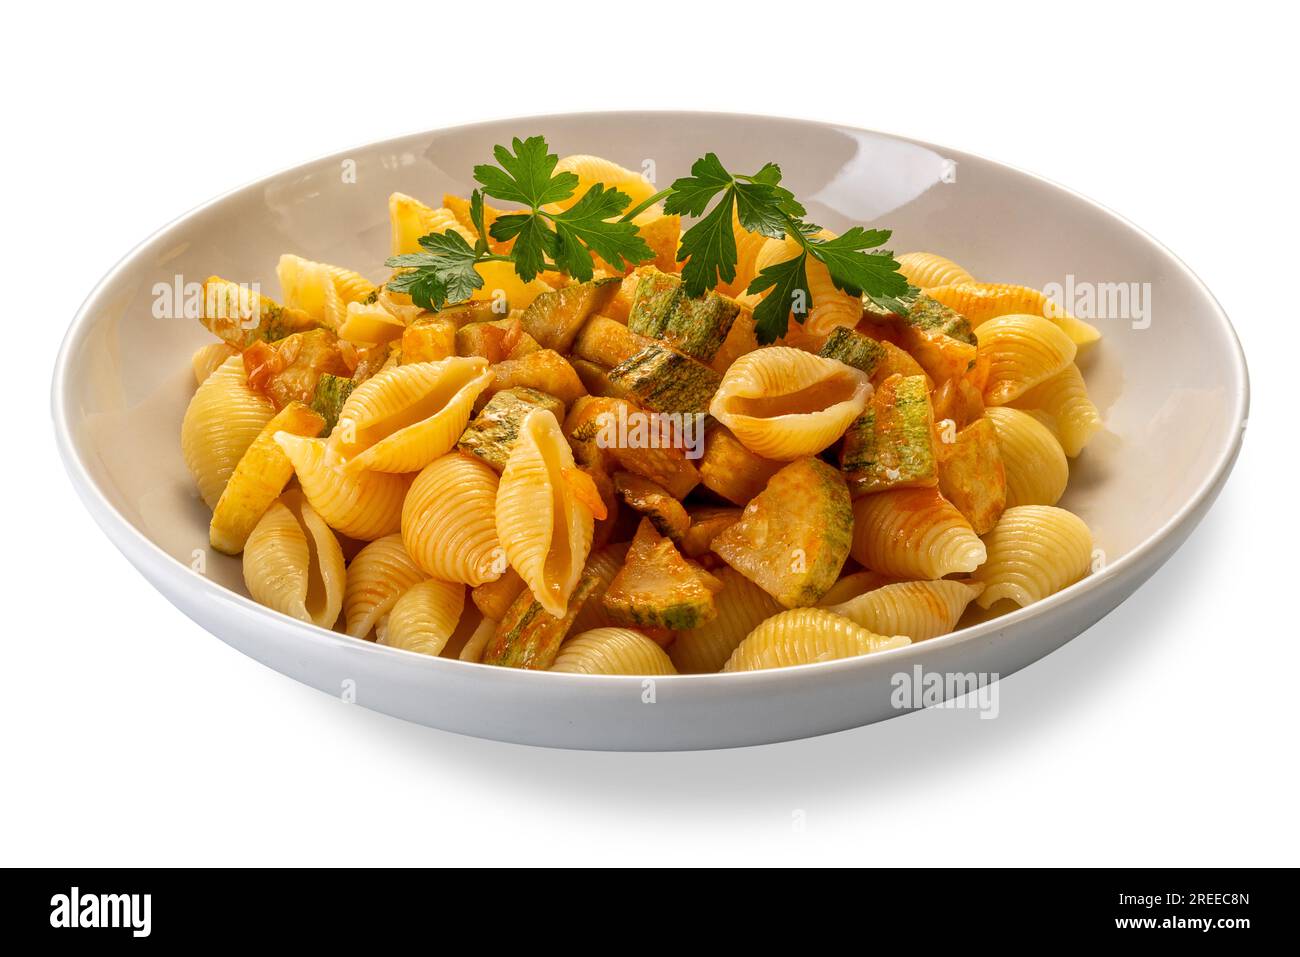 Conchiglie rigate pasta. Macaroni in shape of ridged shell with courgette and tomato sauce with parsley leaves in white dish isolated on white with cl Stock Photo